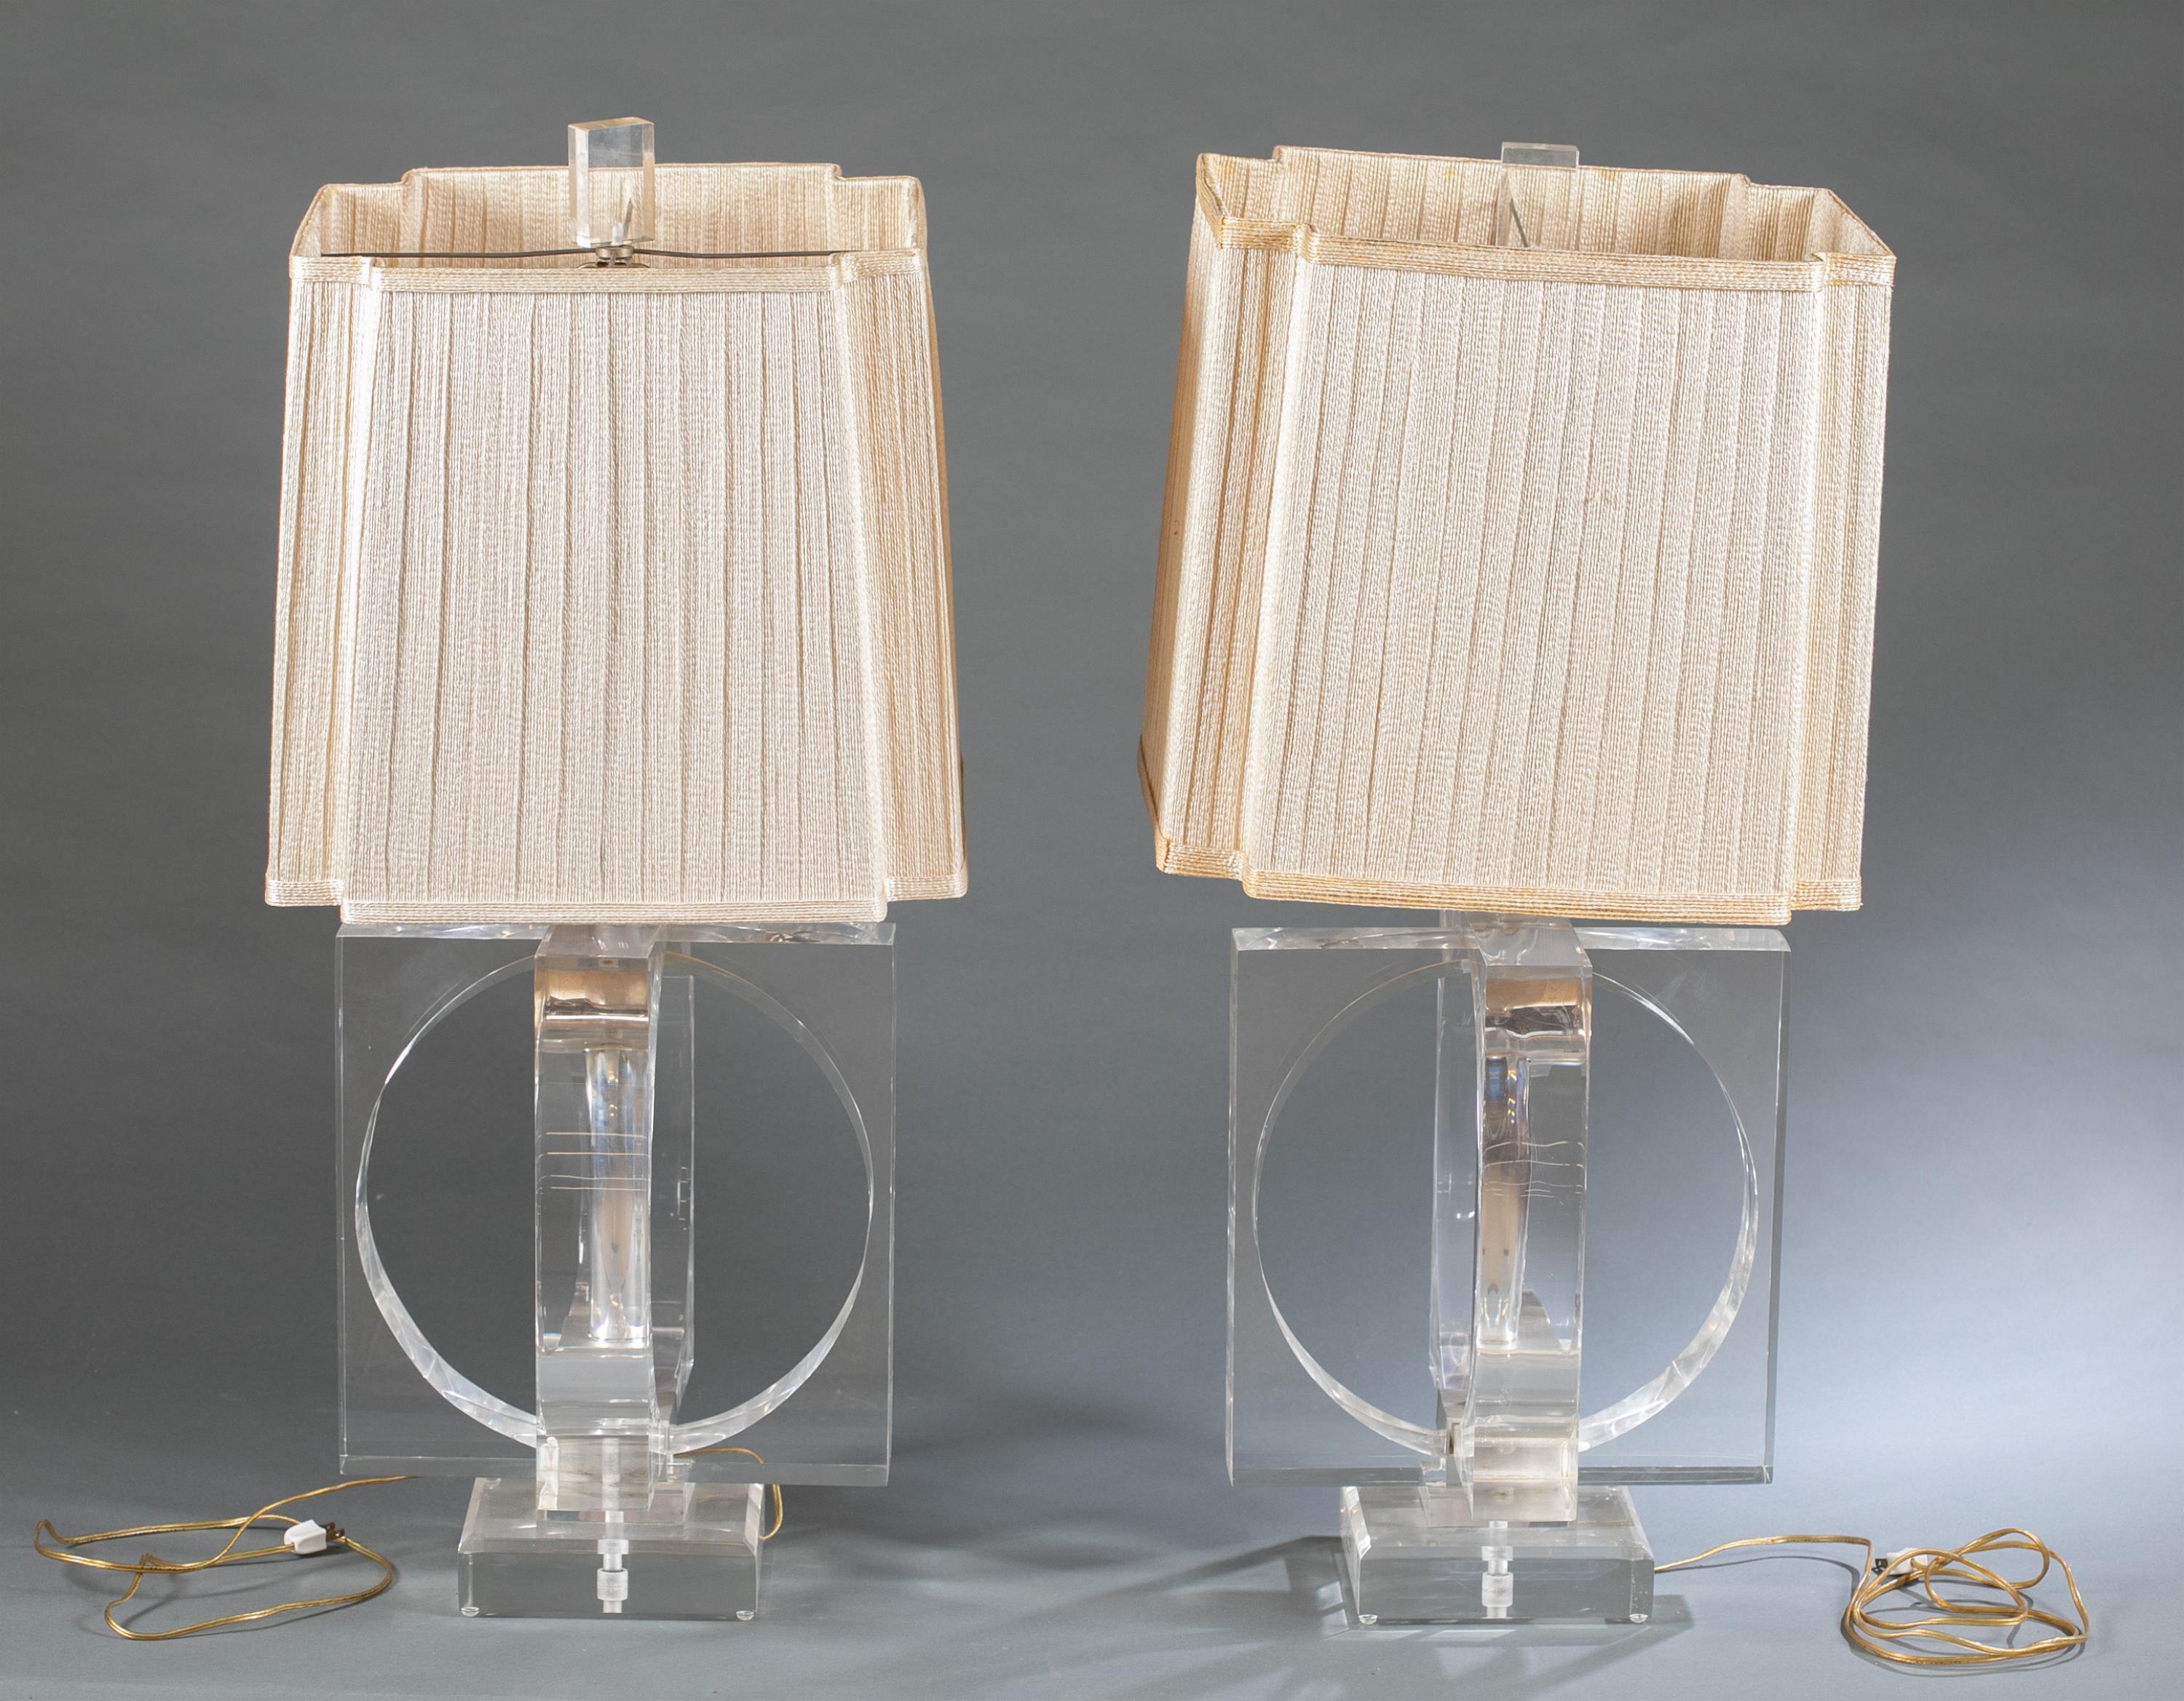 Pair of Modernist Lucite acrylic lamps.